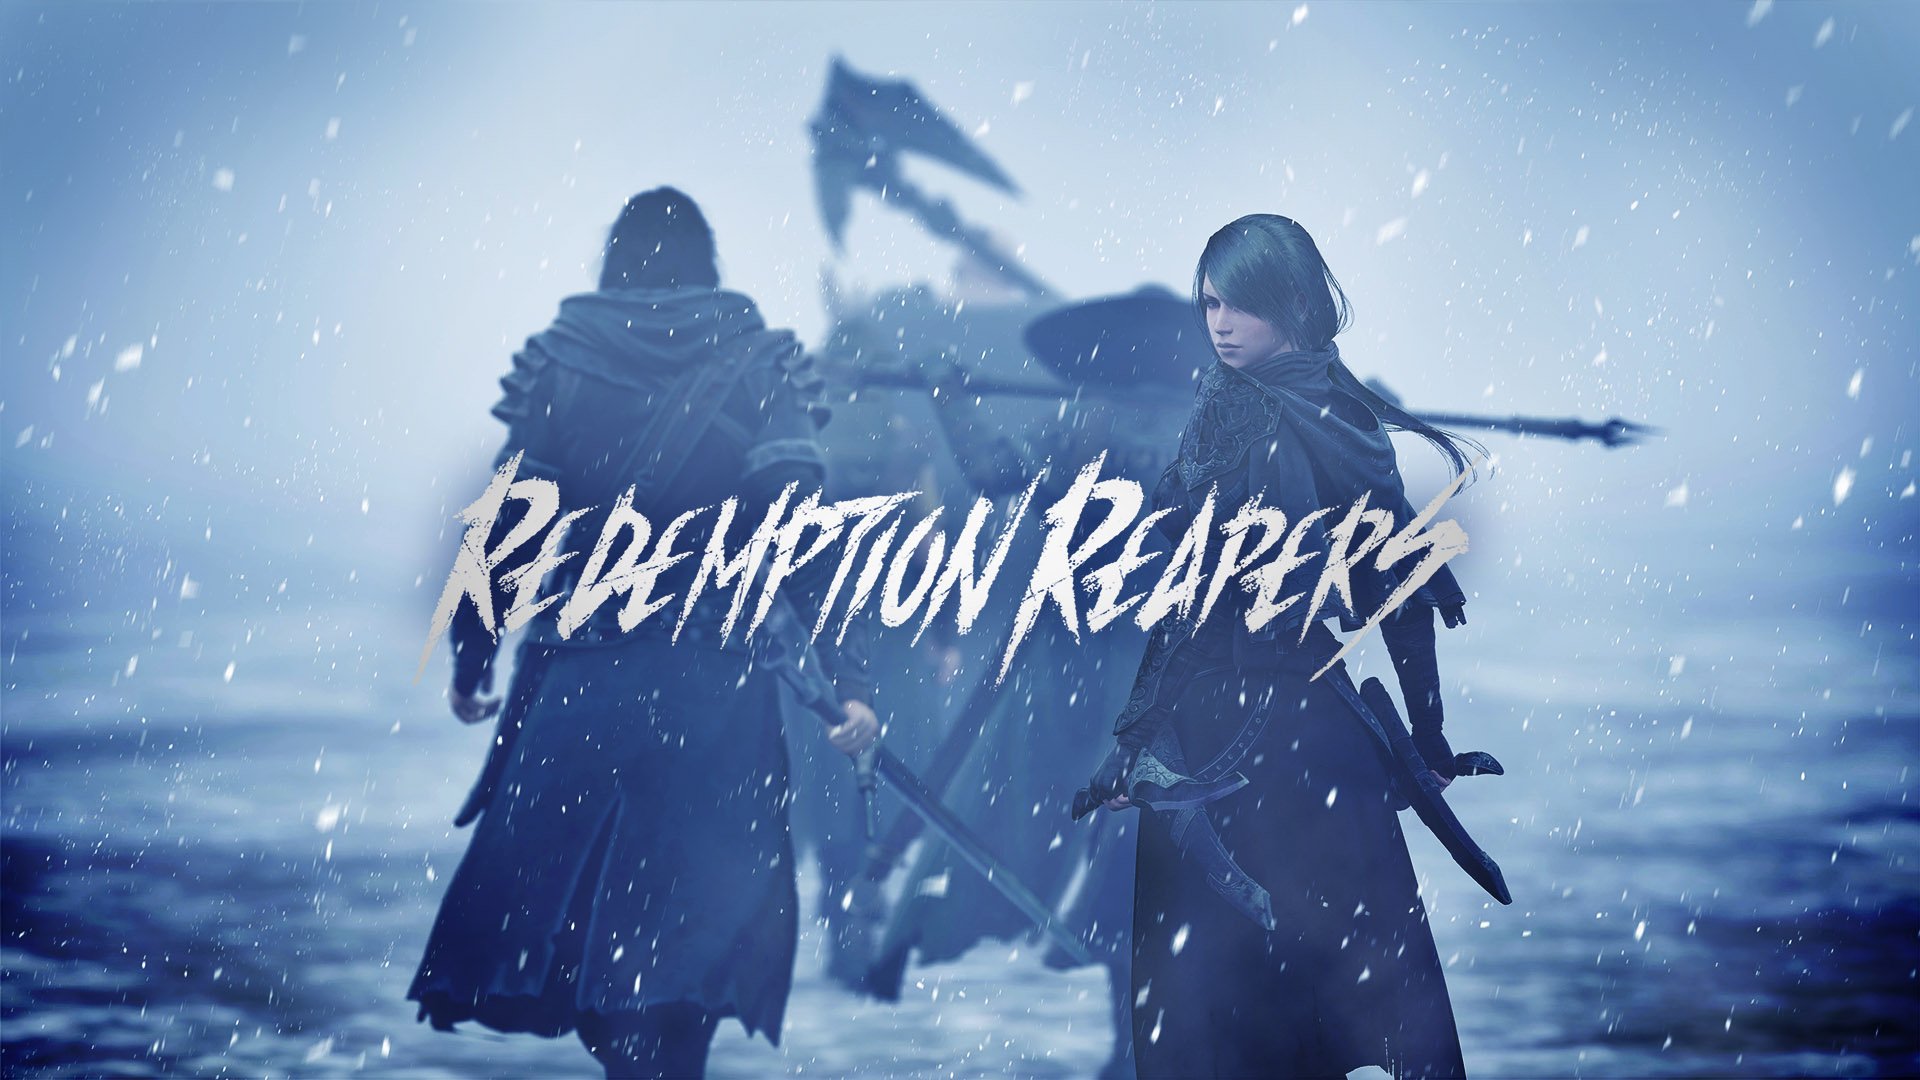 #
      Binary Haze Interactive and Adglobe announce strategy RPG Redemption Reapers for PS4, Switch, and PC